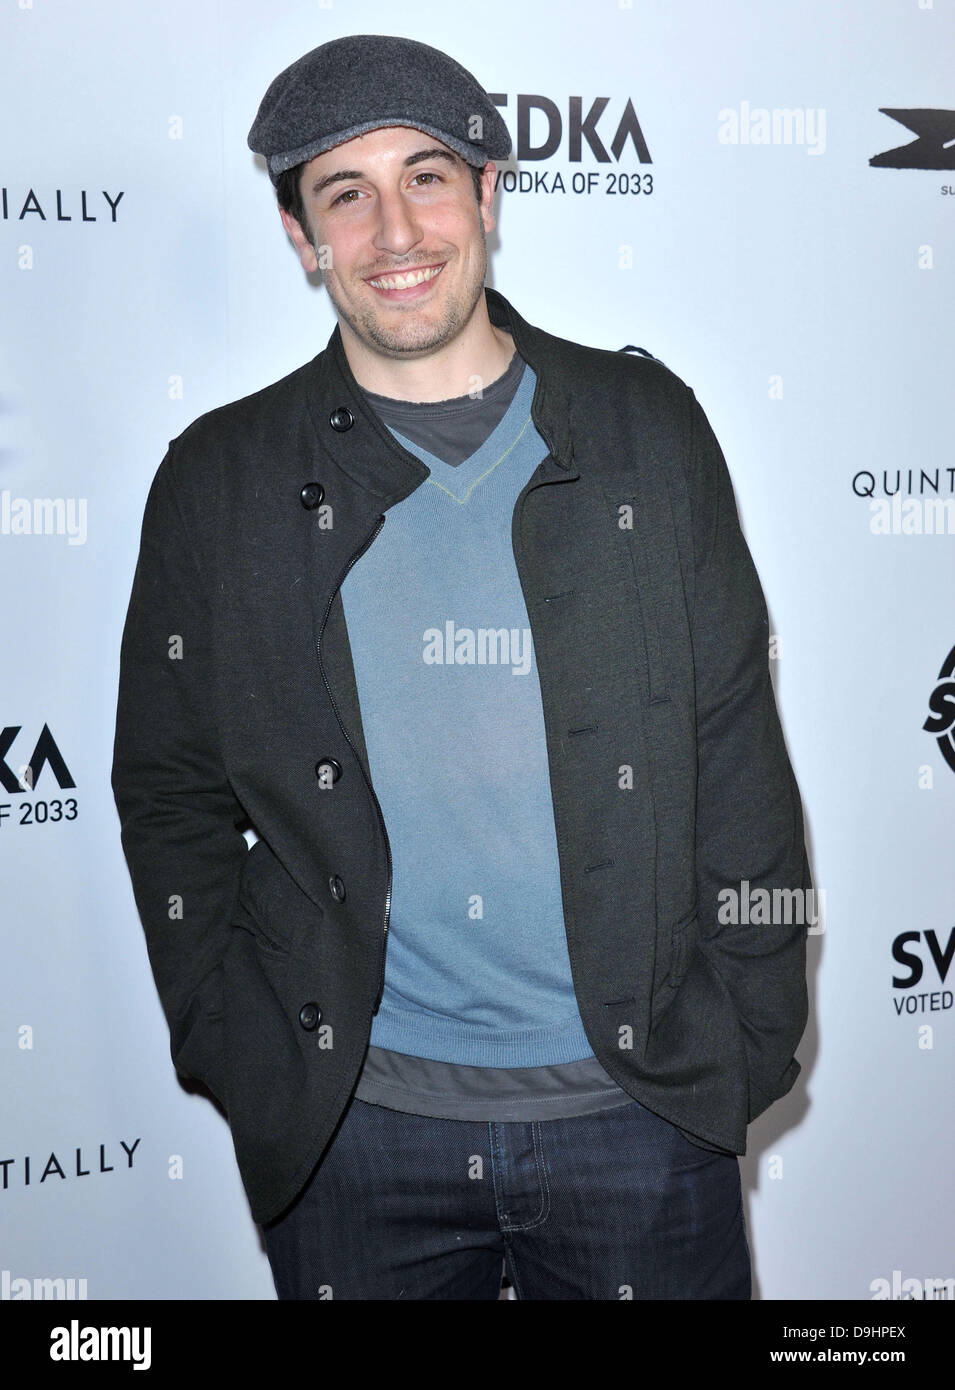 Jason Biggs Los Angeles premiere of 'Super' held at The Egyptian Theatre - Arrivals Los Angeles, California - 21.03.11 Stock Photo